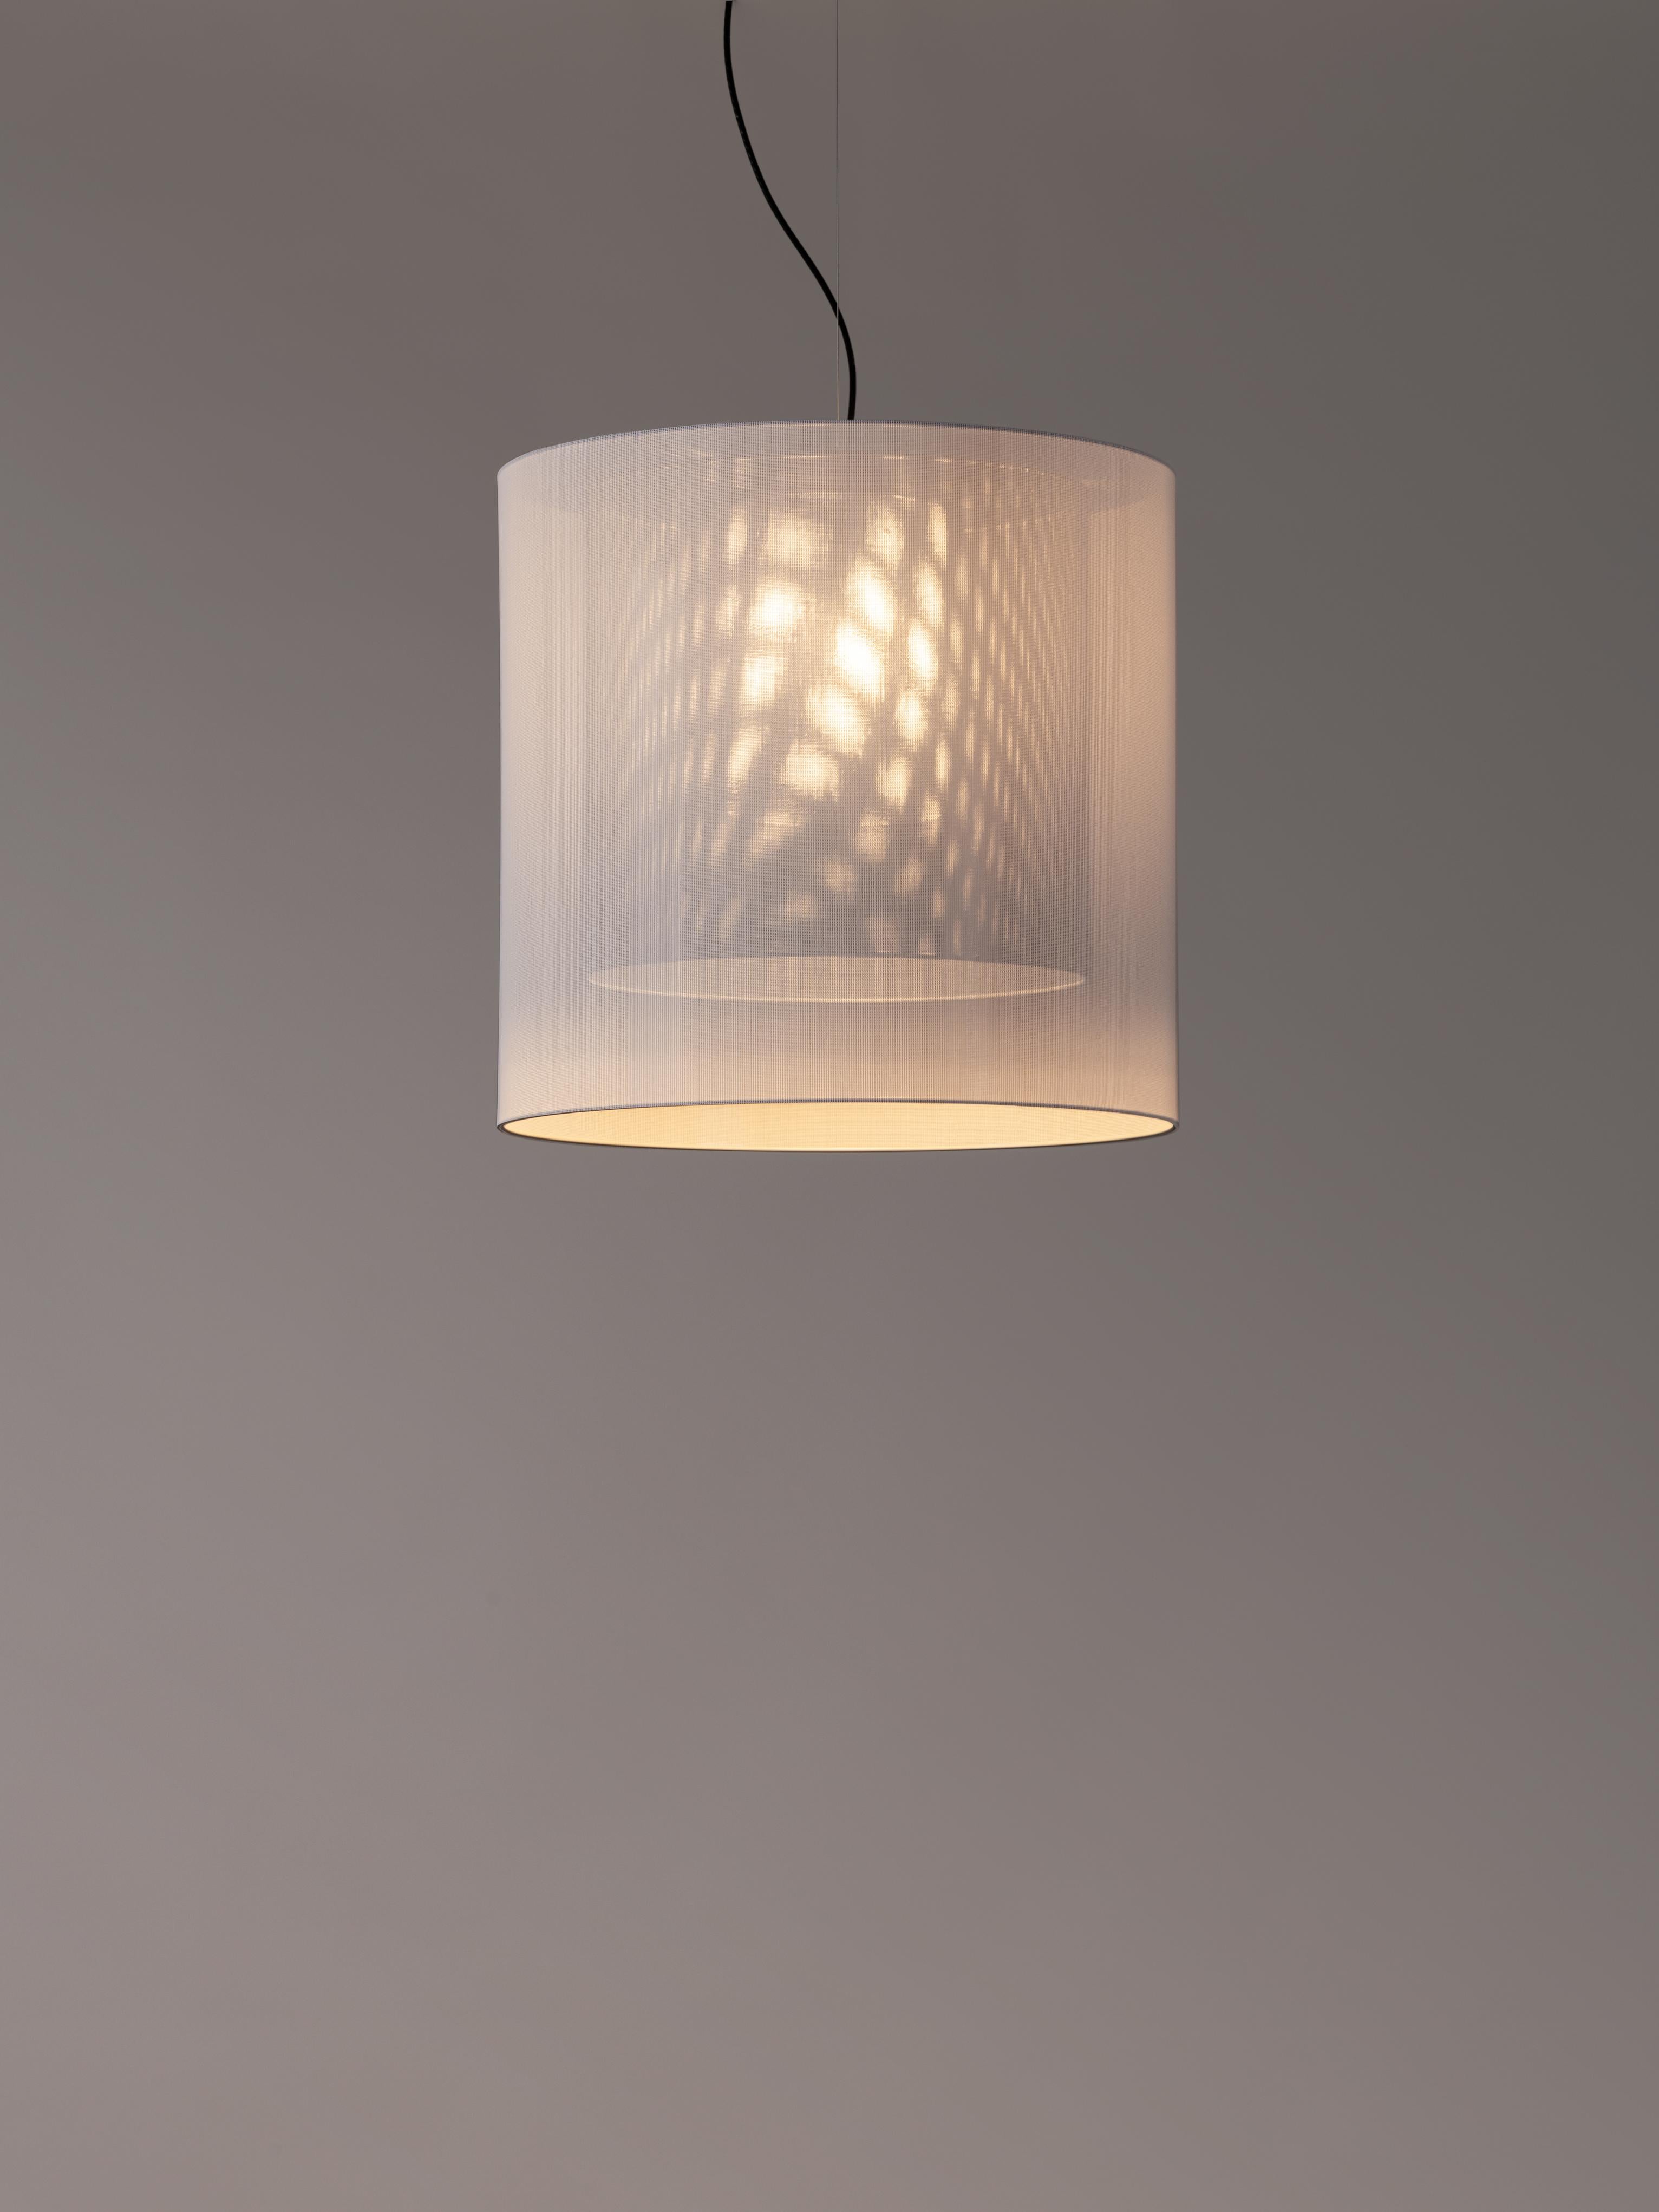 White and grey Moaré LM pendant lamp by Antoni Arola
Dimensions: D 62 x H 60 cm
Materials: Metal, polyester.
Available in other colors and sizes.

Moaré’s multiple combinations of formats and colours make it highly versatile. The series takes its